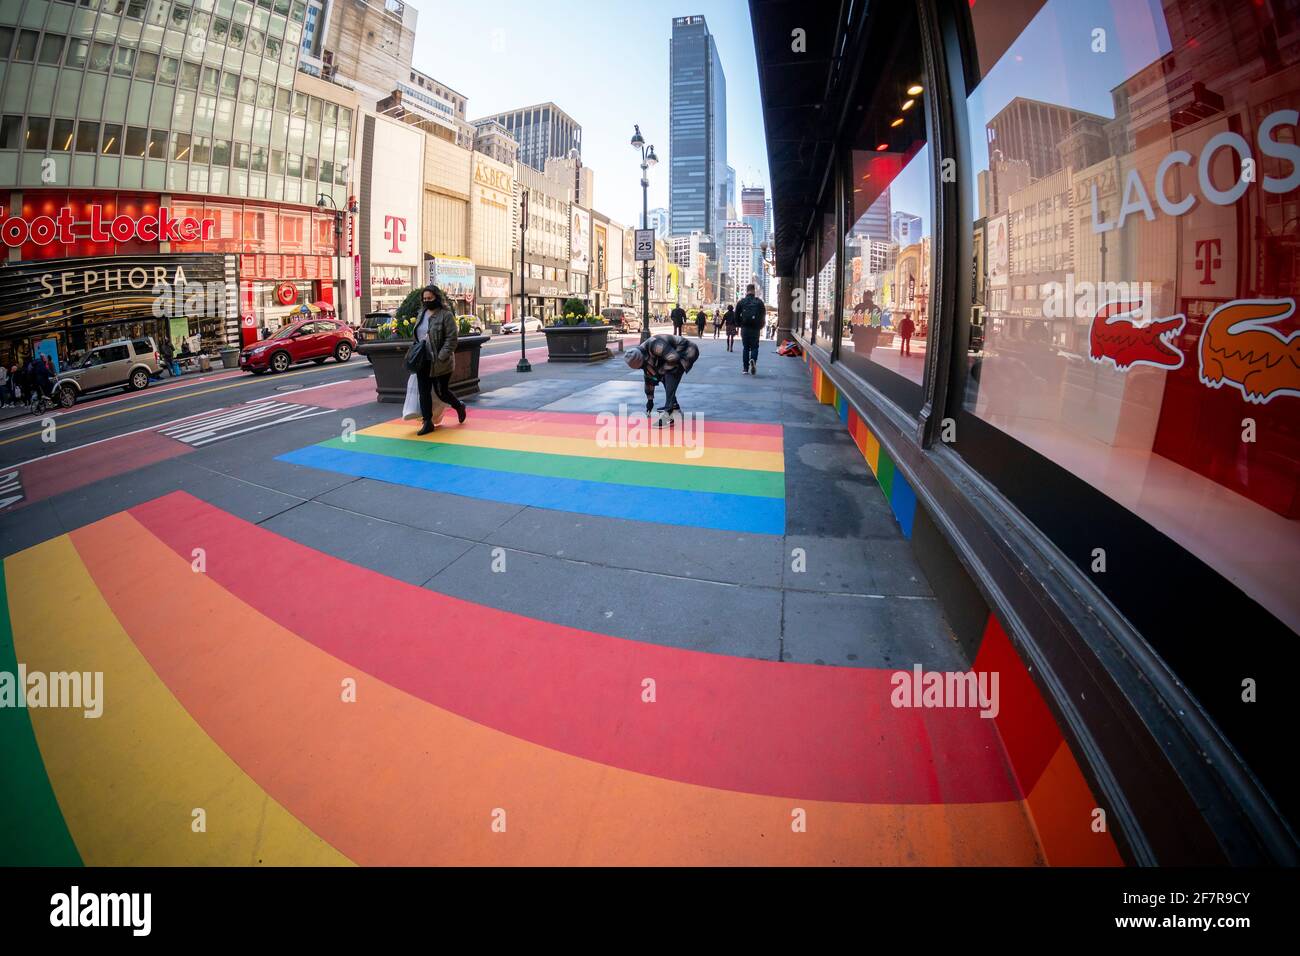 A worker removes a vinyl rainbow from in front of Macy’s department store on Tuesday, March 30, 2021. The display was part of a promotion for the Lacoste X Polaroid collaboration that was sold at Macy’s. The rainbow has been part of the Polaroid logo since Polaroid’s first color instant film was introduces in 1963. (© Richard B. Levine) Stock Photo